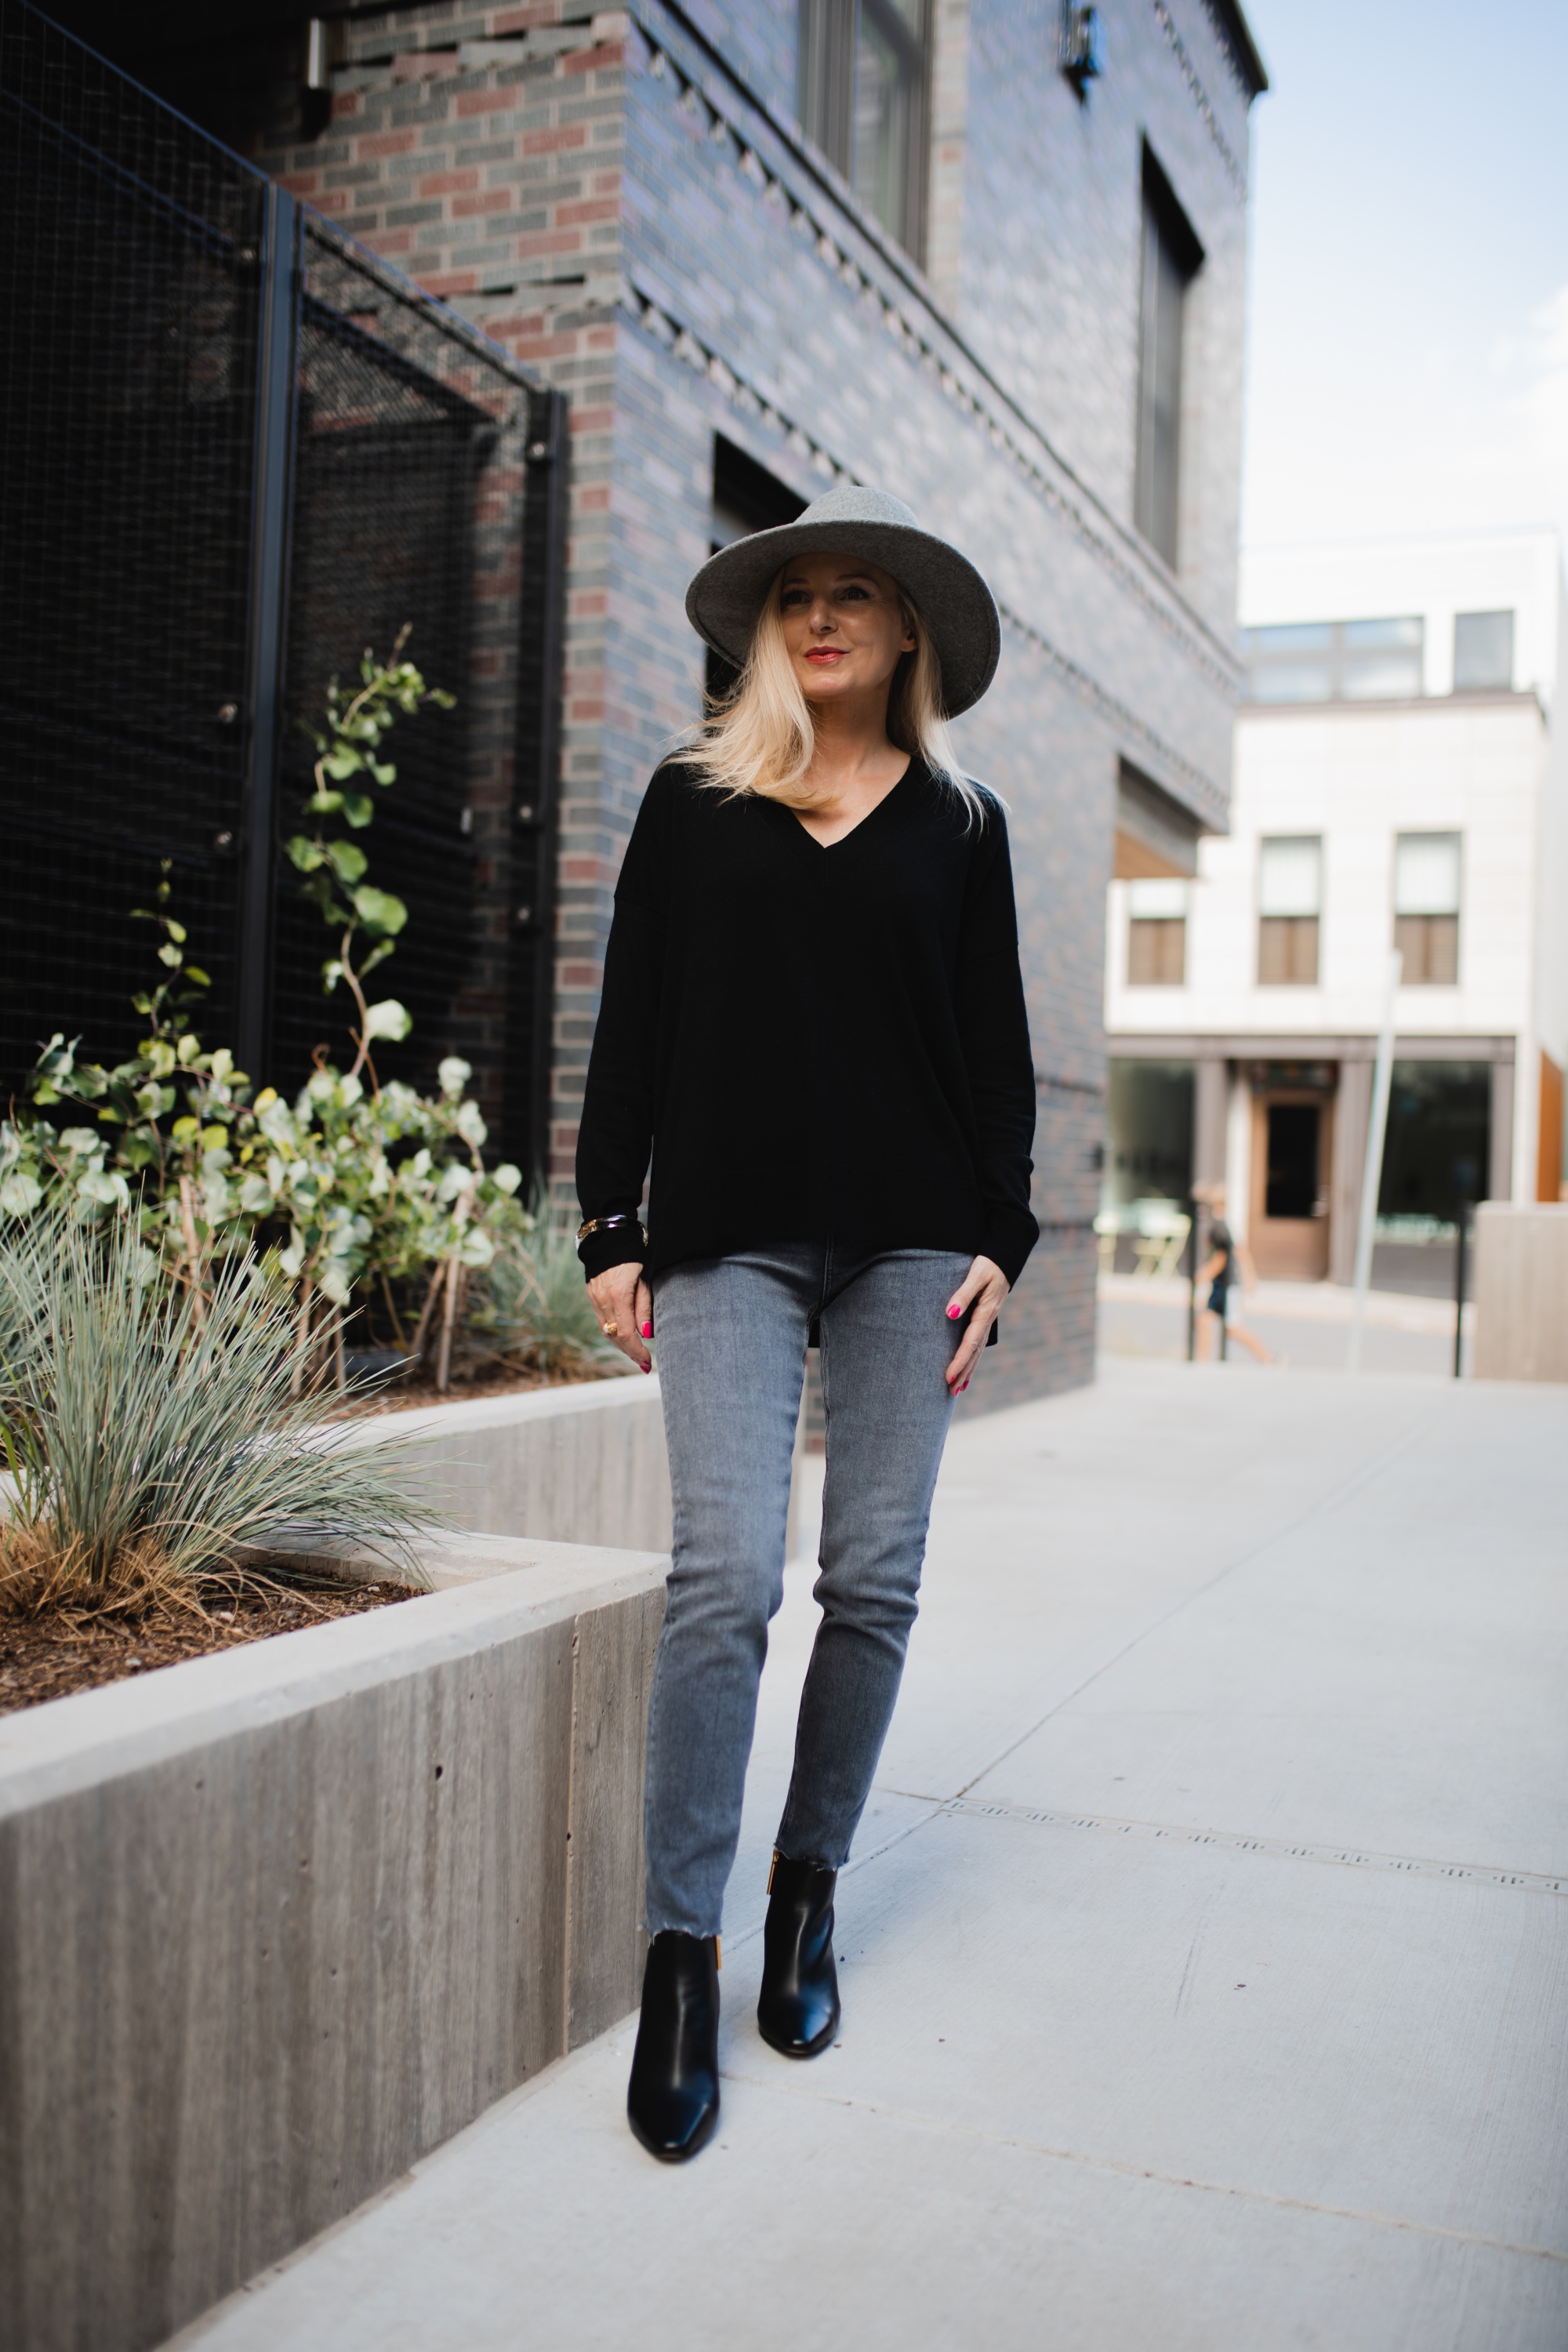 Nordstrom Sale Basics, Fashion Blogger Erin Busbee Of Busbee Style Wearing A Basic Black Sweater By Chelsea28 With Gray Rag &Amp; Bone Skinny Jeans, Treasure &Amp; Bond Hat, And Louise Et Cie Black Booties All From The Nordstrom Anniversary Sale In Telluride, Colorado